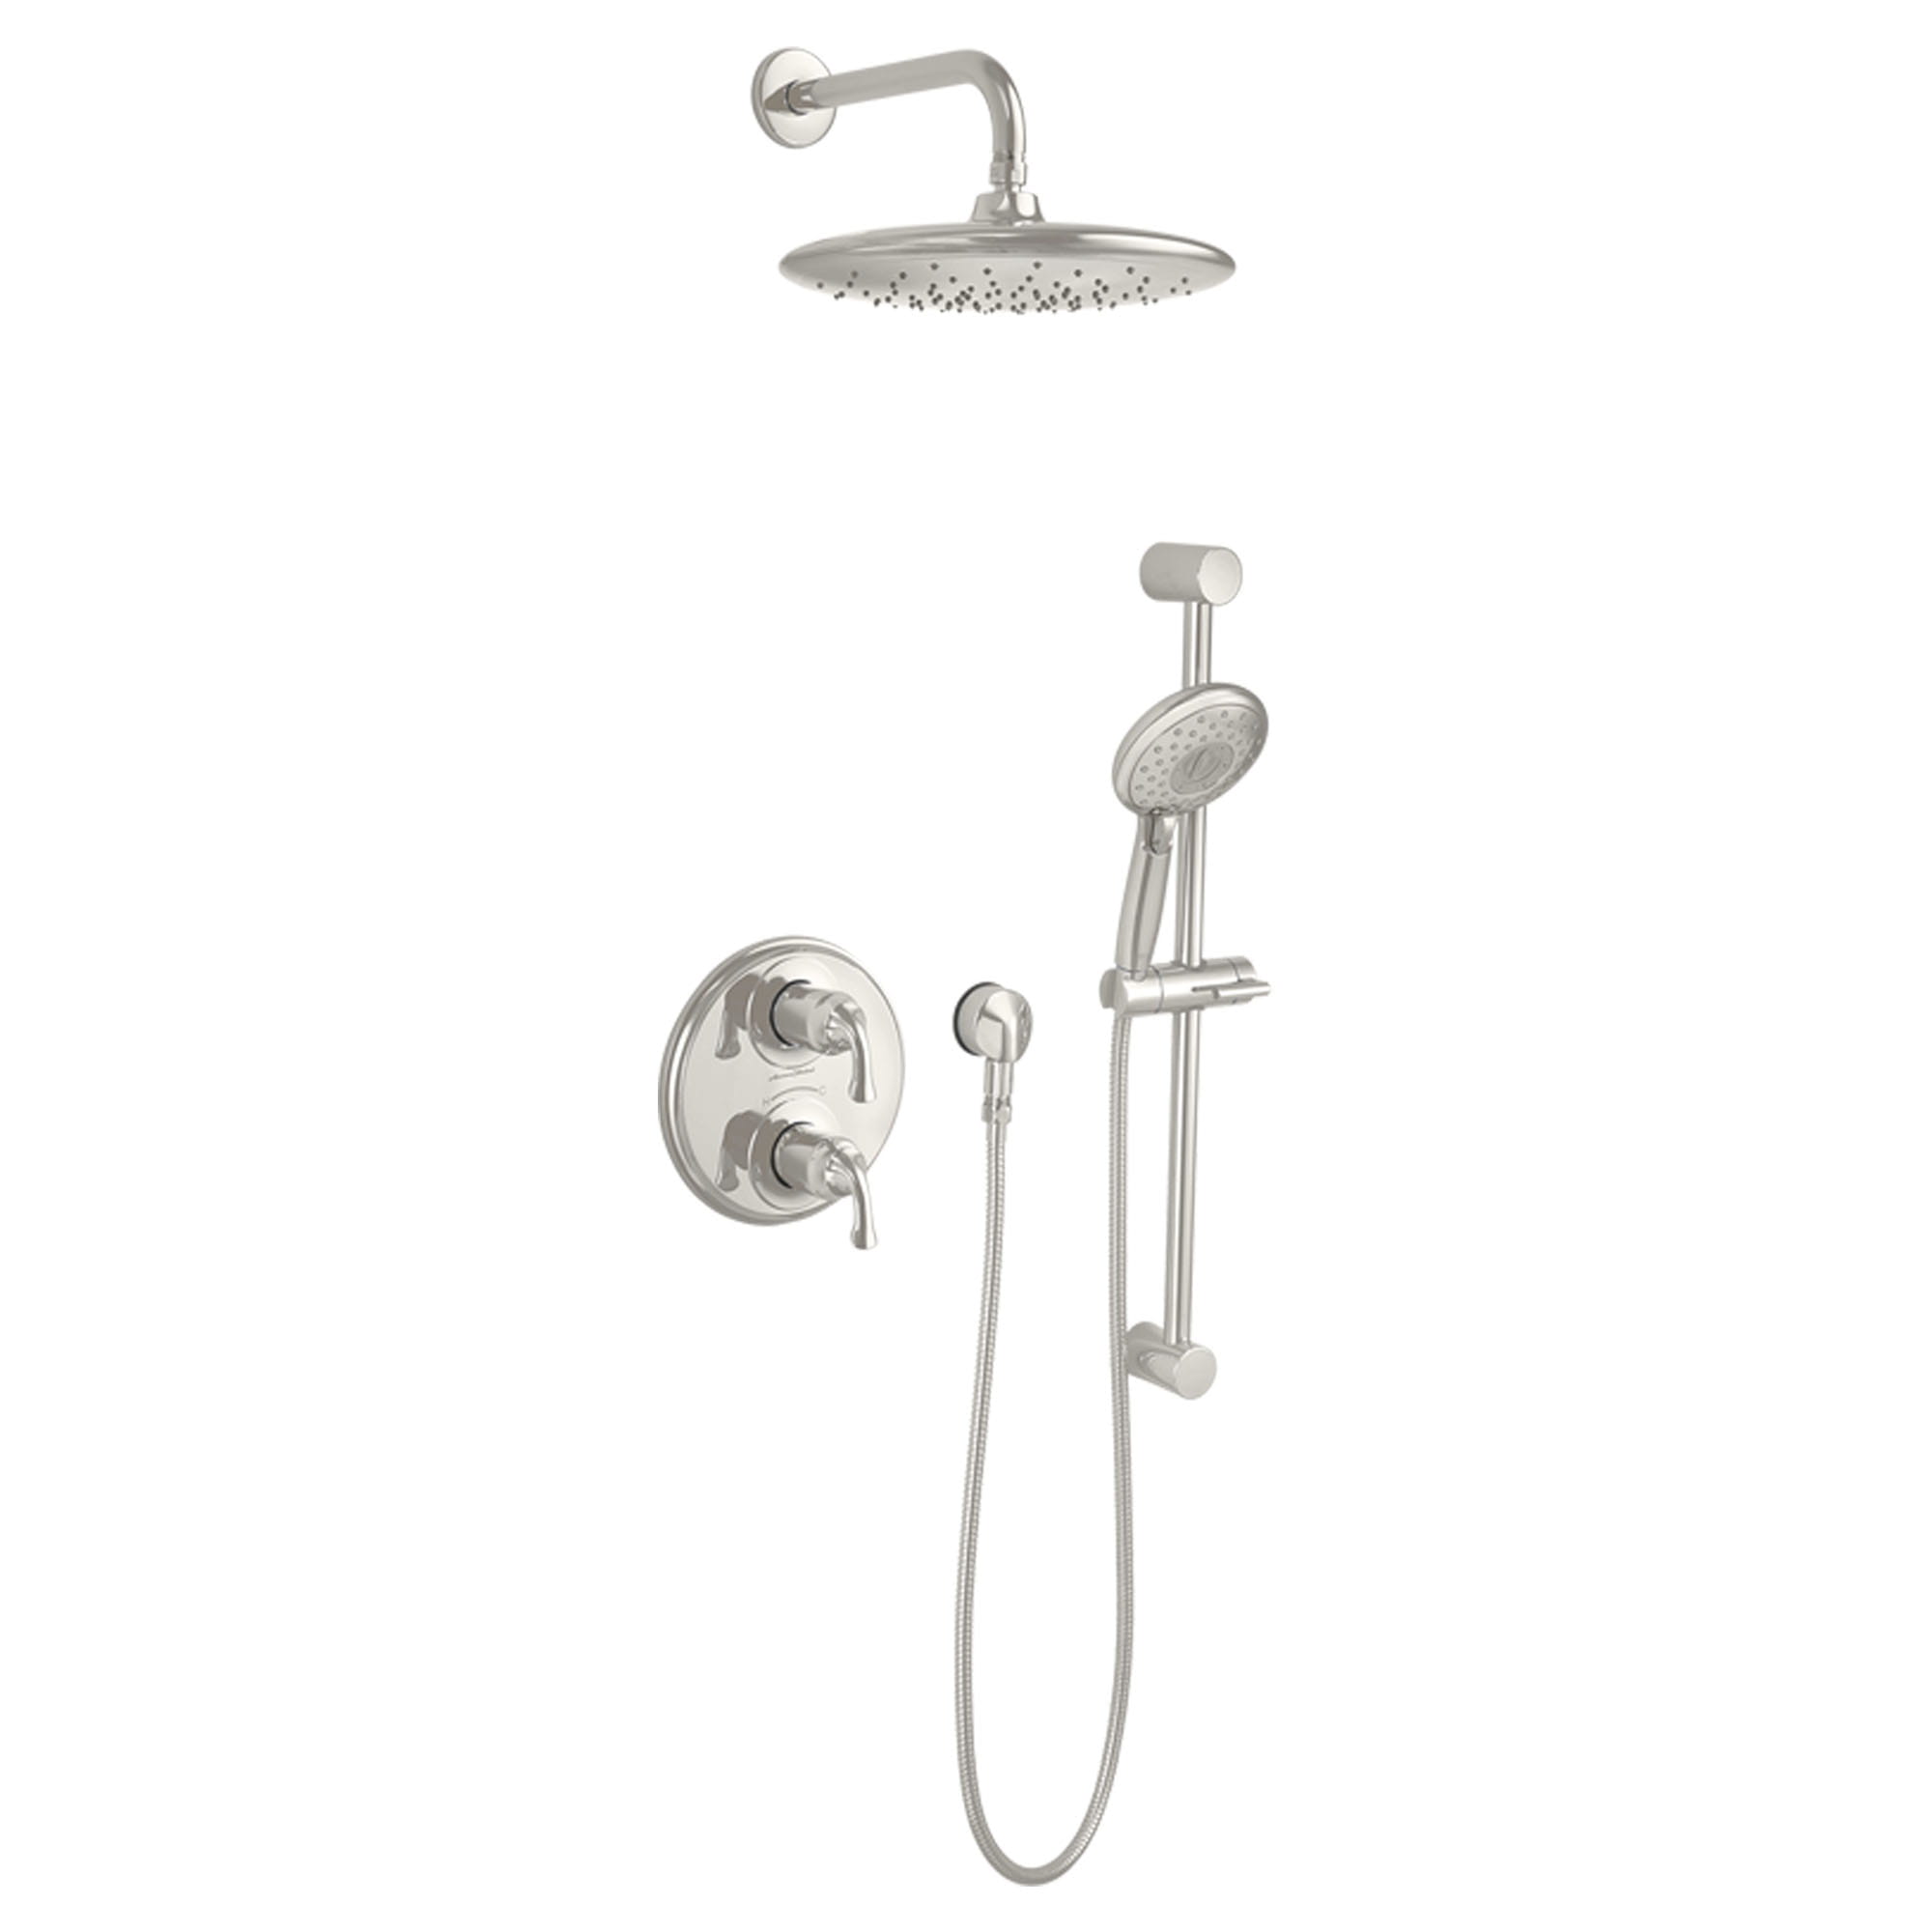 Spectra Handheld 25 gpm 95 L min 5 Inch 4 Function Hand Shower POLISHED  NICKEL